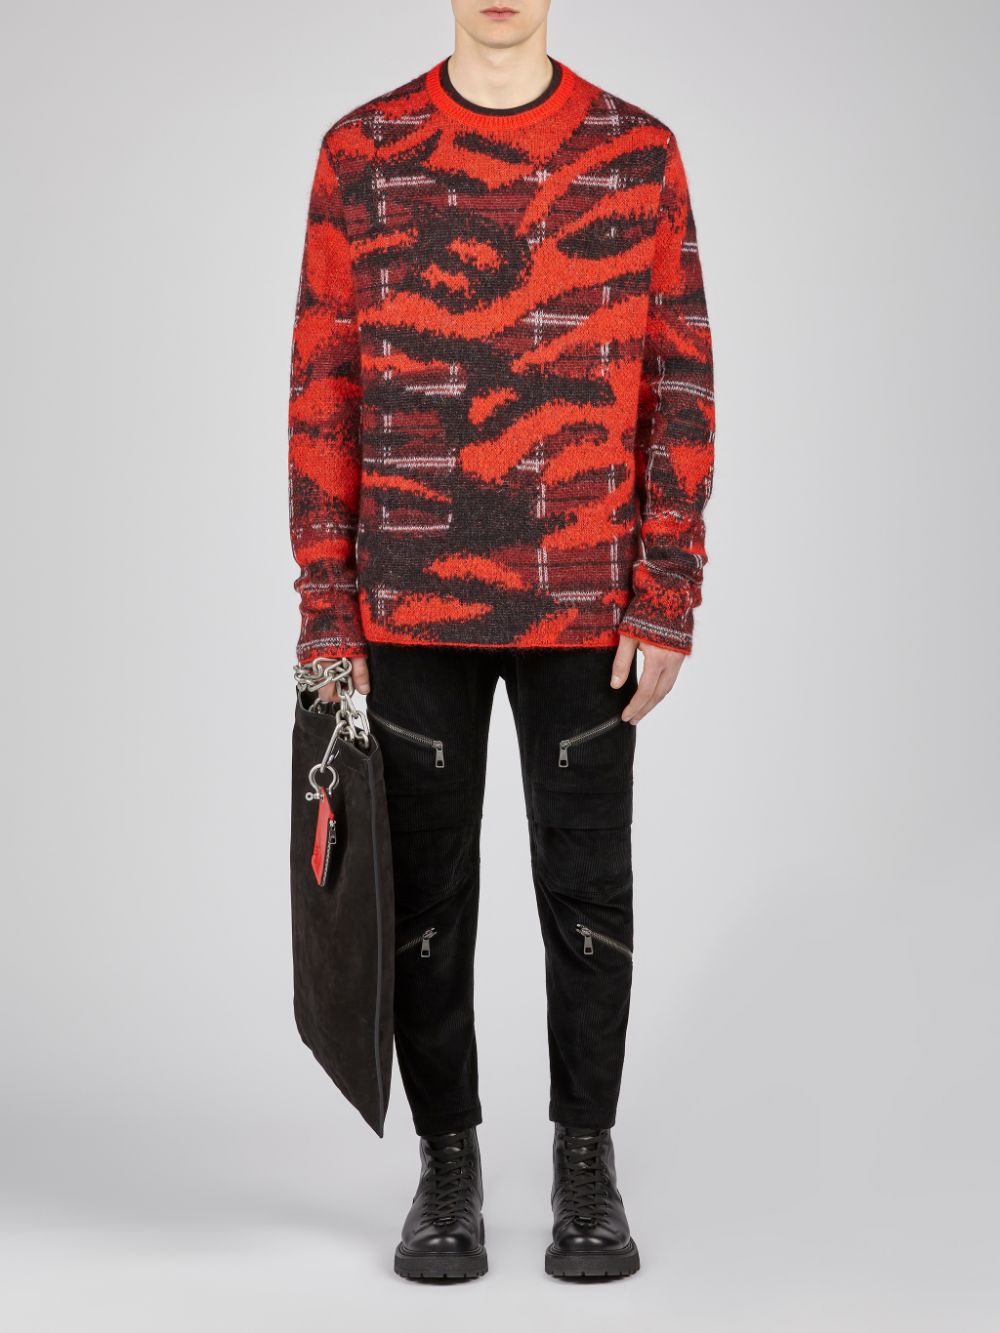 Neil Barrett Red and black Abstract Sweater